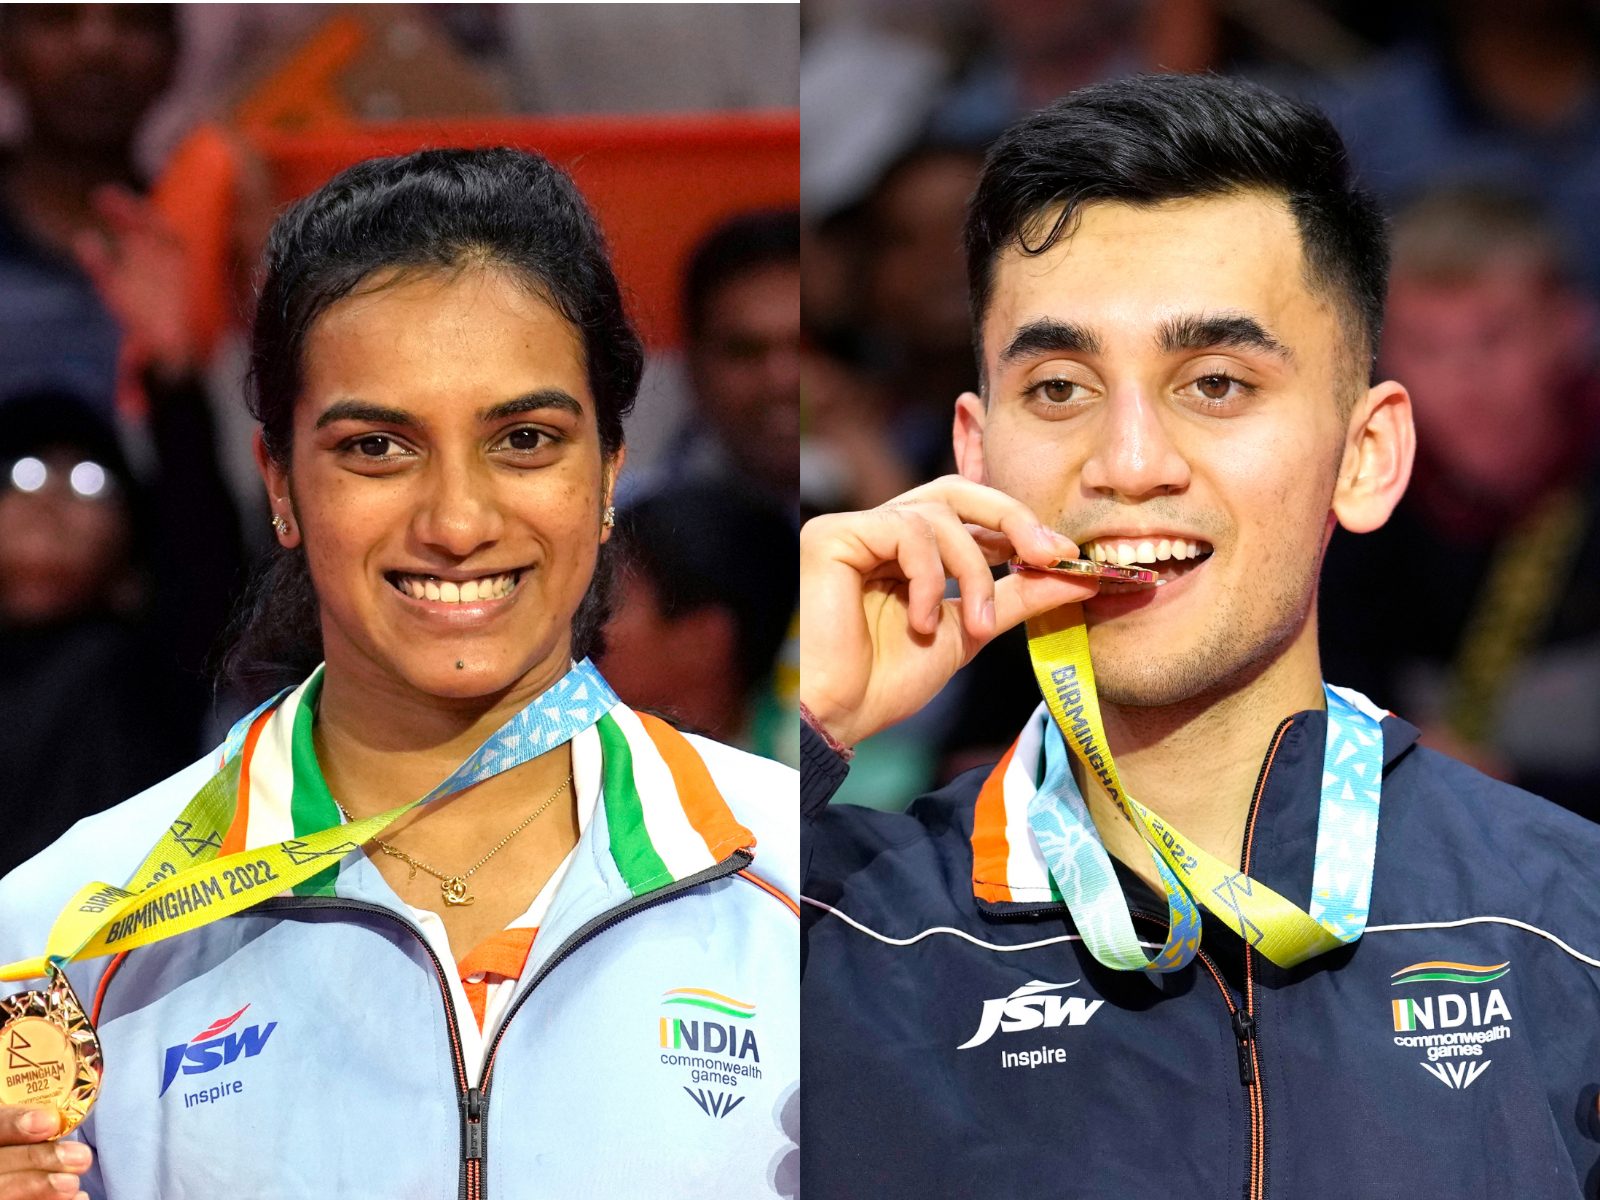 With Three Golds at CWG 2022, India Badminton Assert Their Supremacy